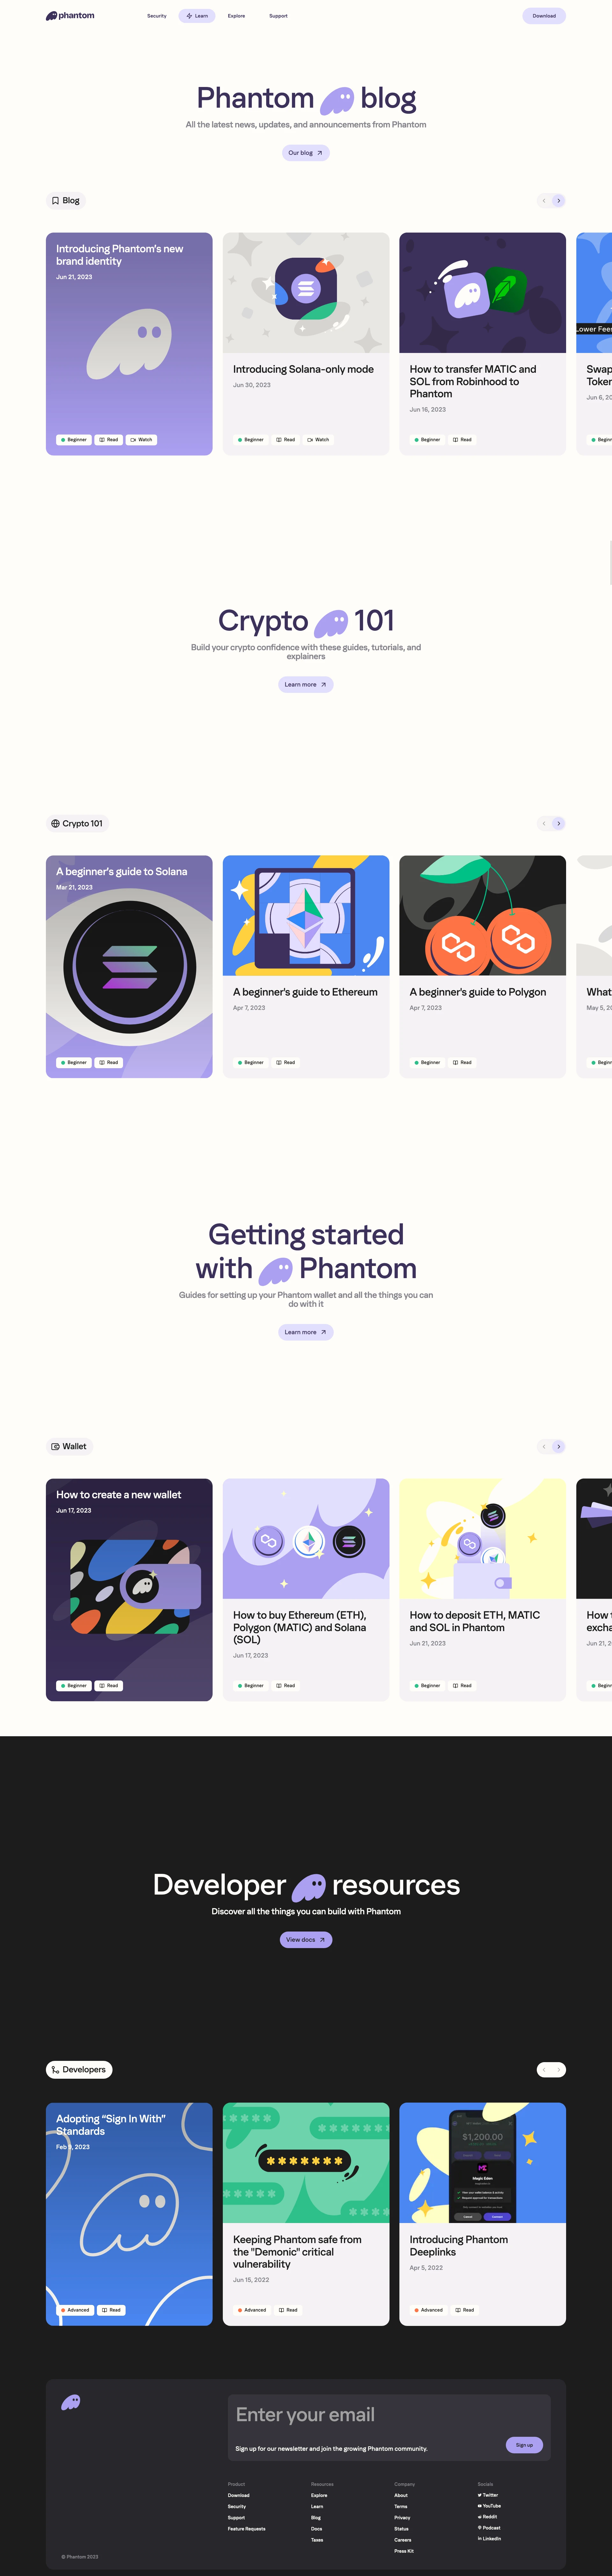 Phantom Landing Page Example: Your trusted companion for NFTs & DeFi on Solana, Ethereum, & Polygon.